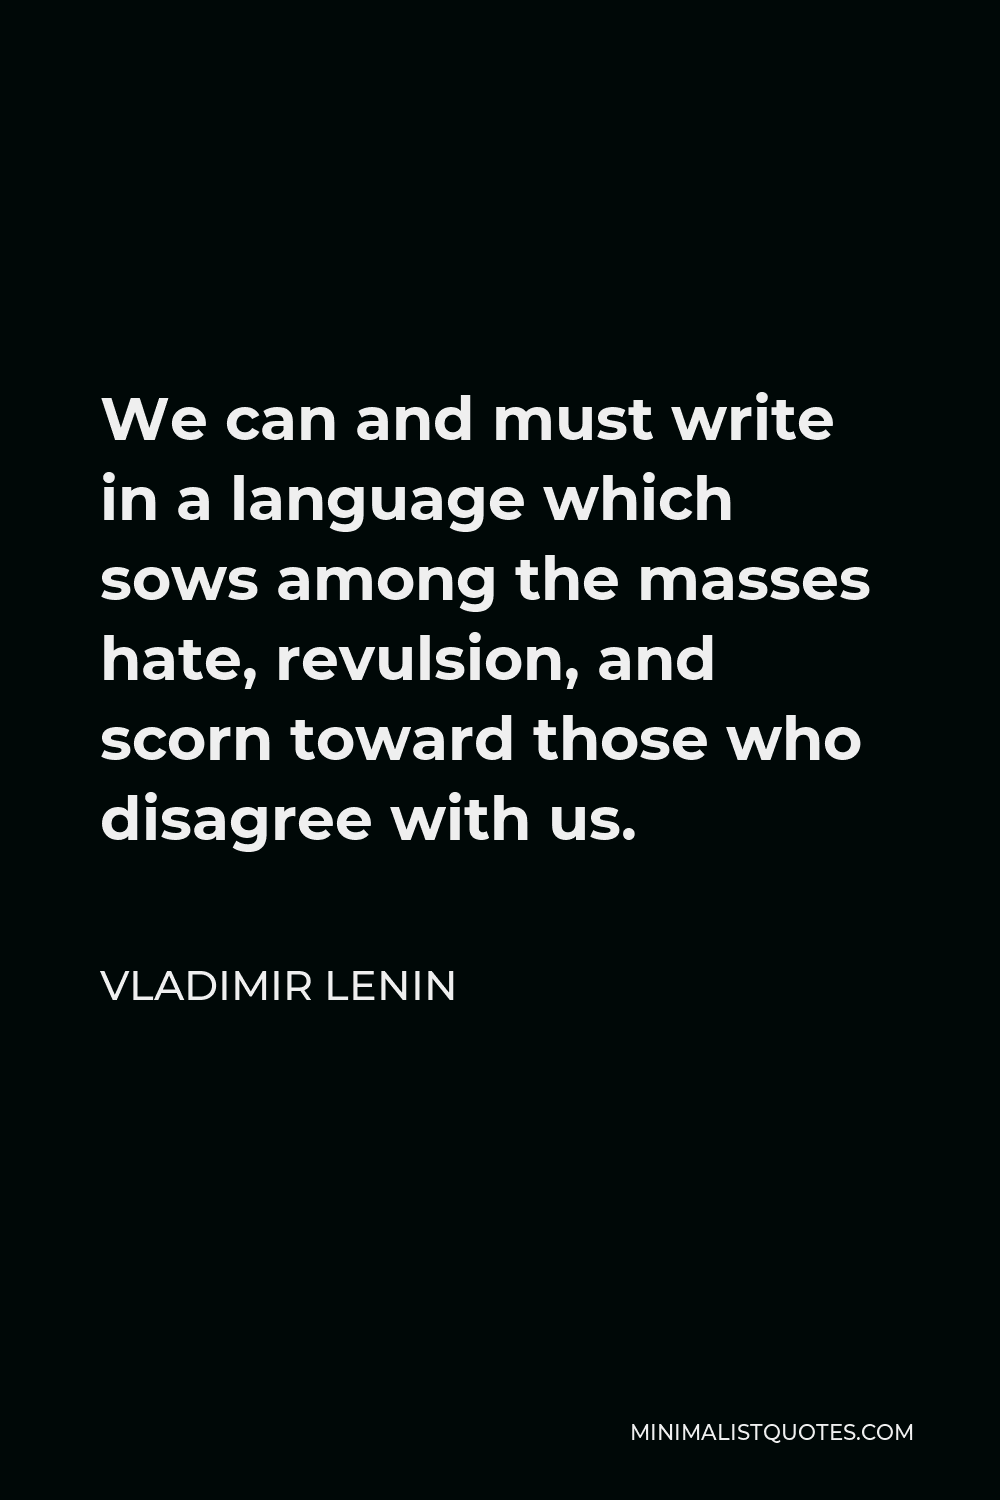 Vladimir Lenin Quote - We can and must write in a language which sows among the masses hate, revulsion, and scorn toward those who disagree with us.